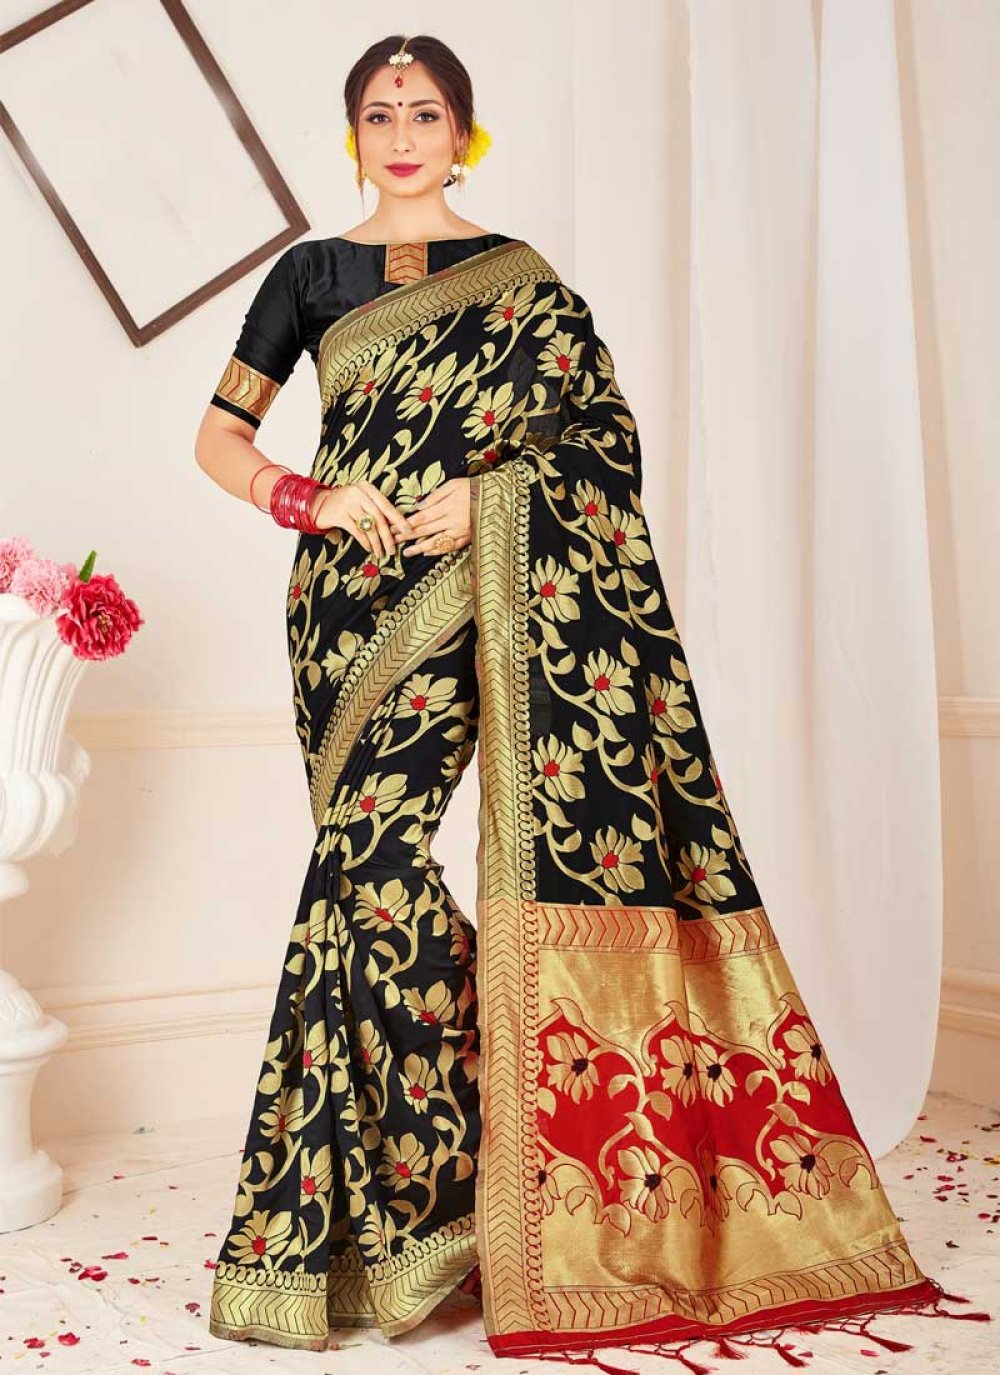 Woven Work Designer Contemporary Style Saree For Casual